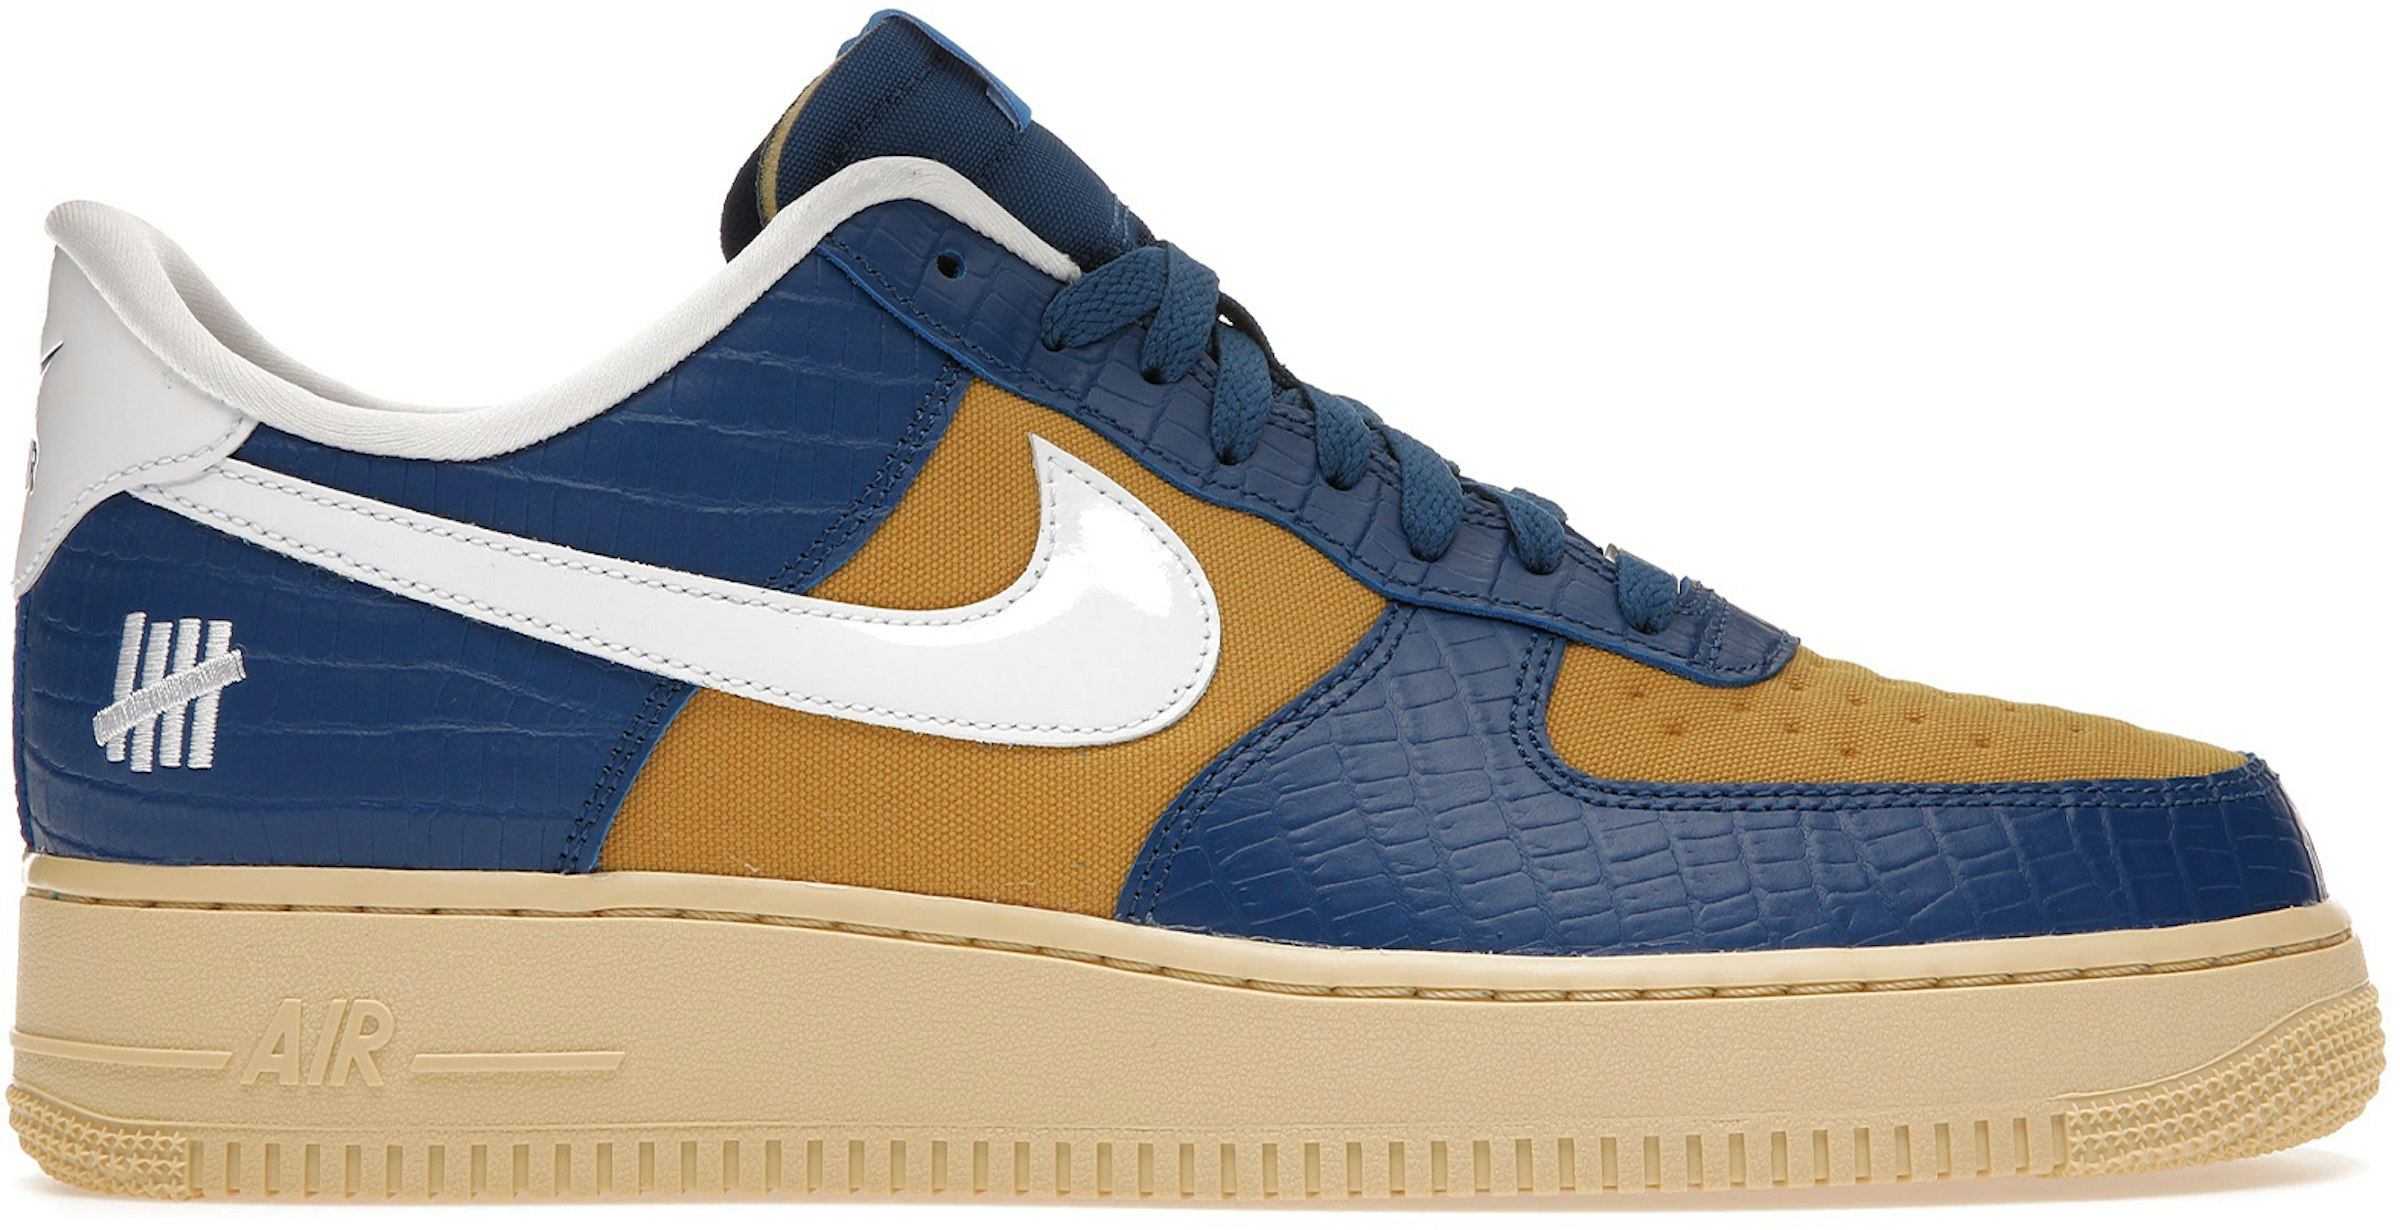 Nike Air Force 1 Low Undefeated 5 On It Blue Yellow Croc Hombre - DM8462-400 - ES